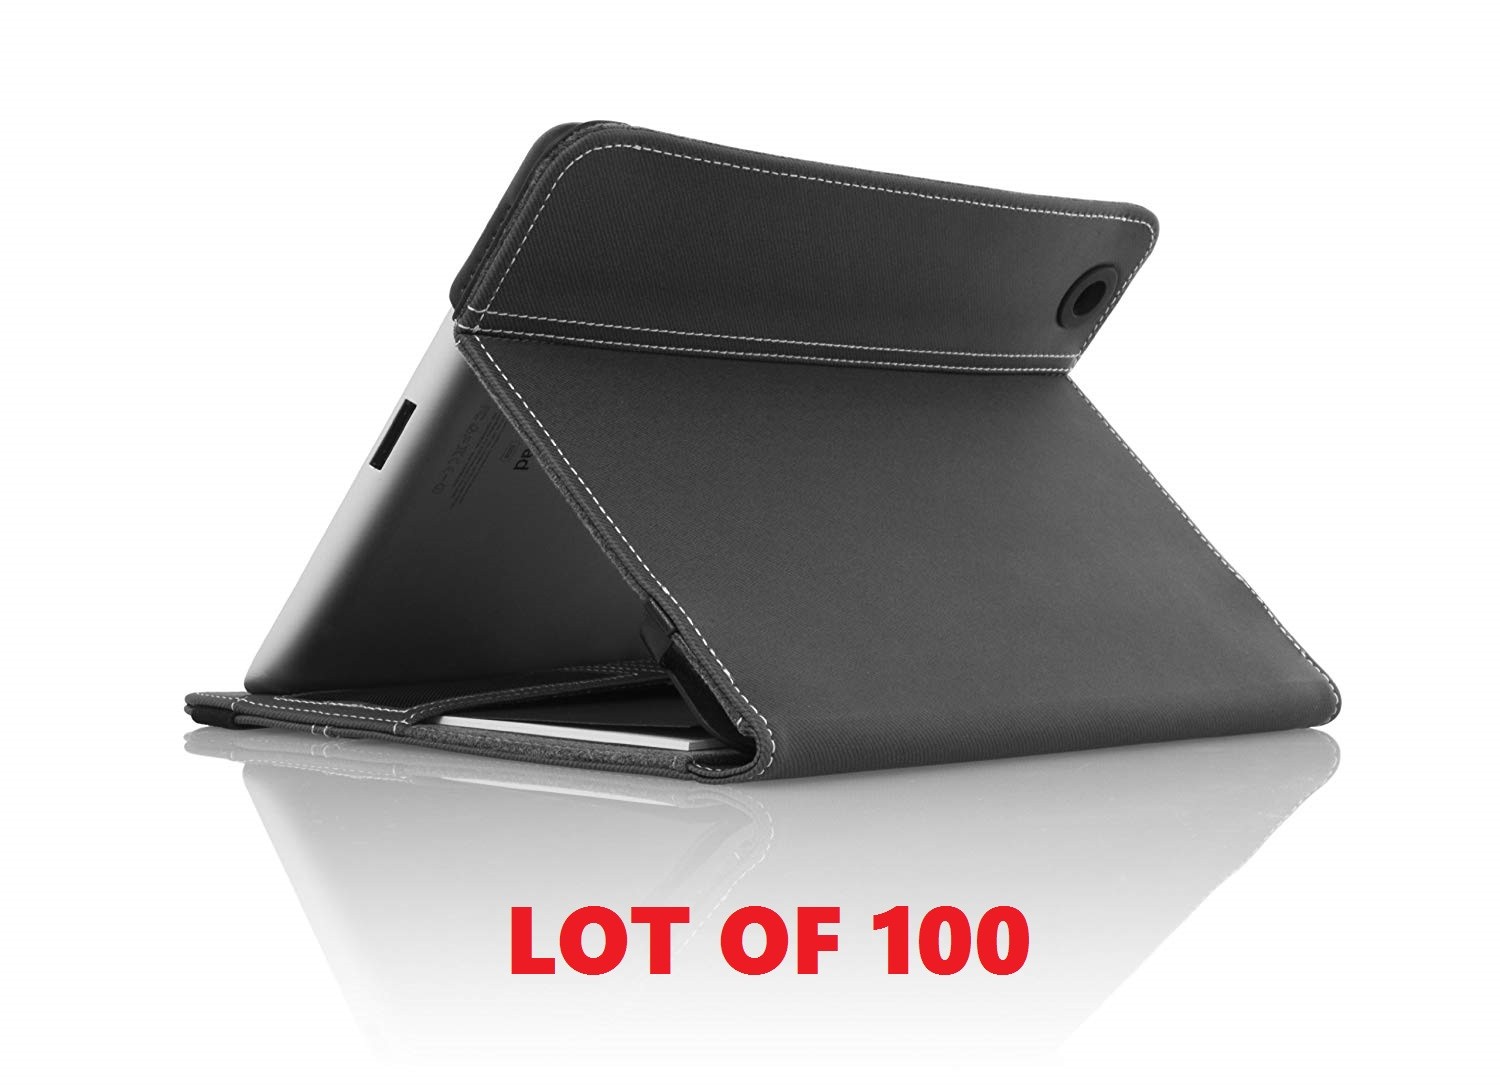 Lot of 100 Targus Business Folio Cases For iPad 3rd 4th Gen THZ15502US Brand New